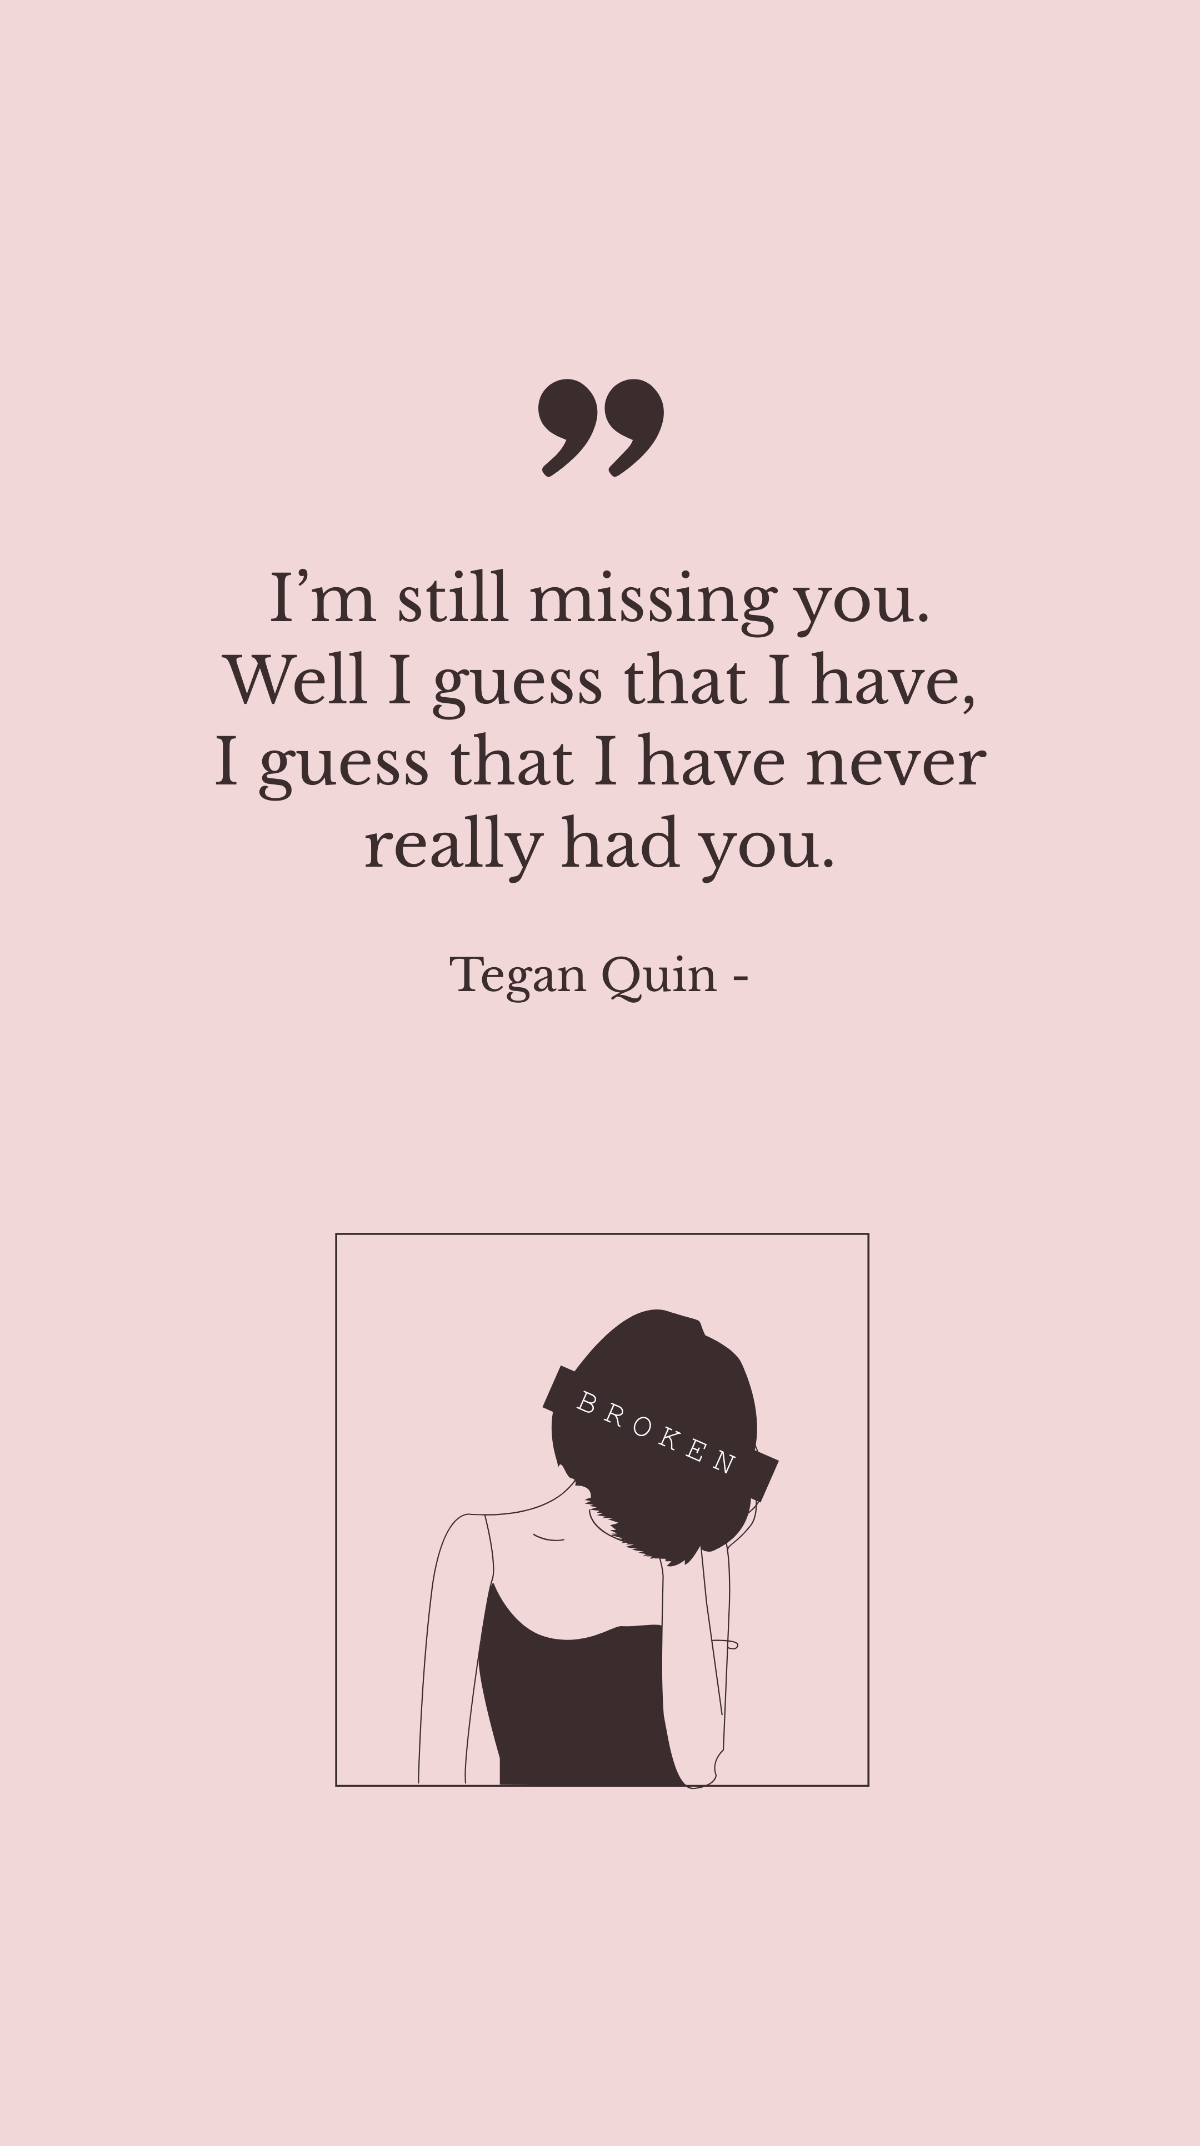 Tegan Quin - I’m still missing you. Well I guess that I have, I guess that I have never really had you.